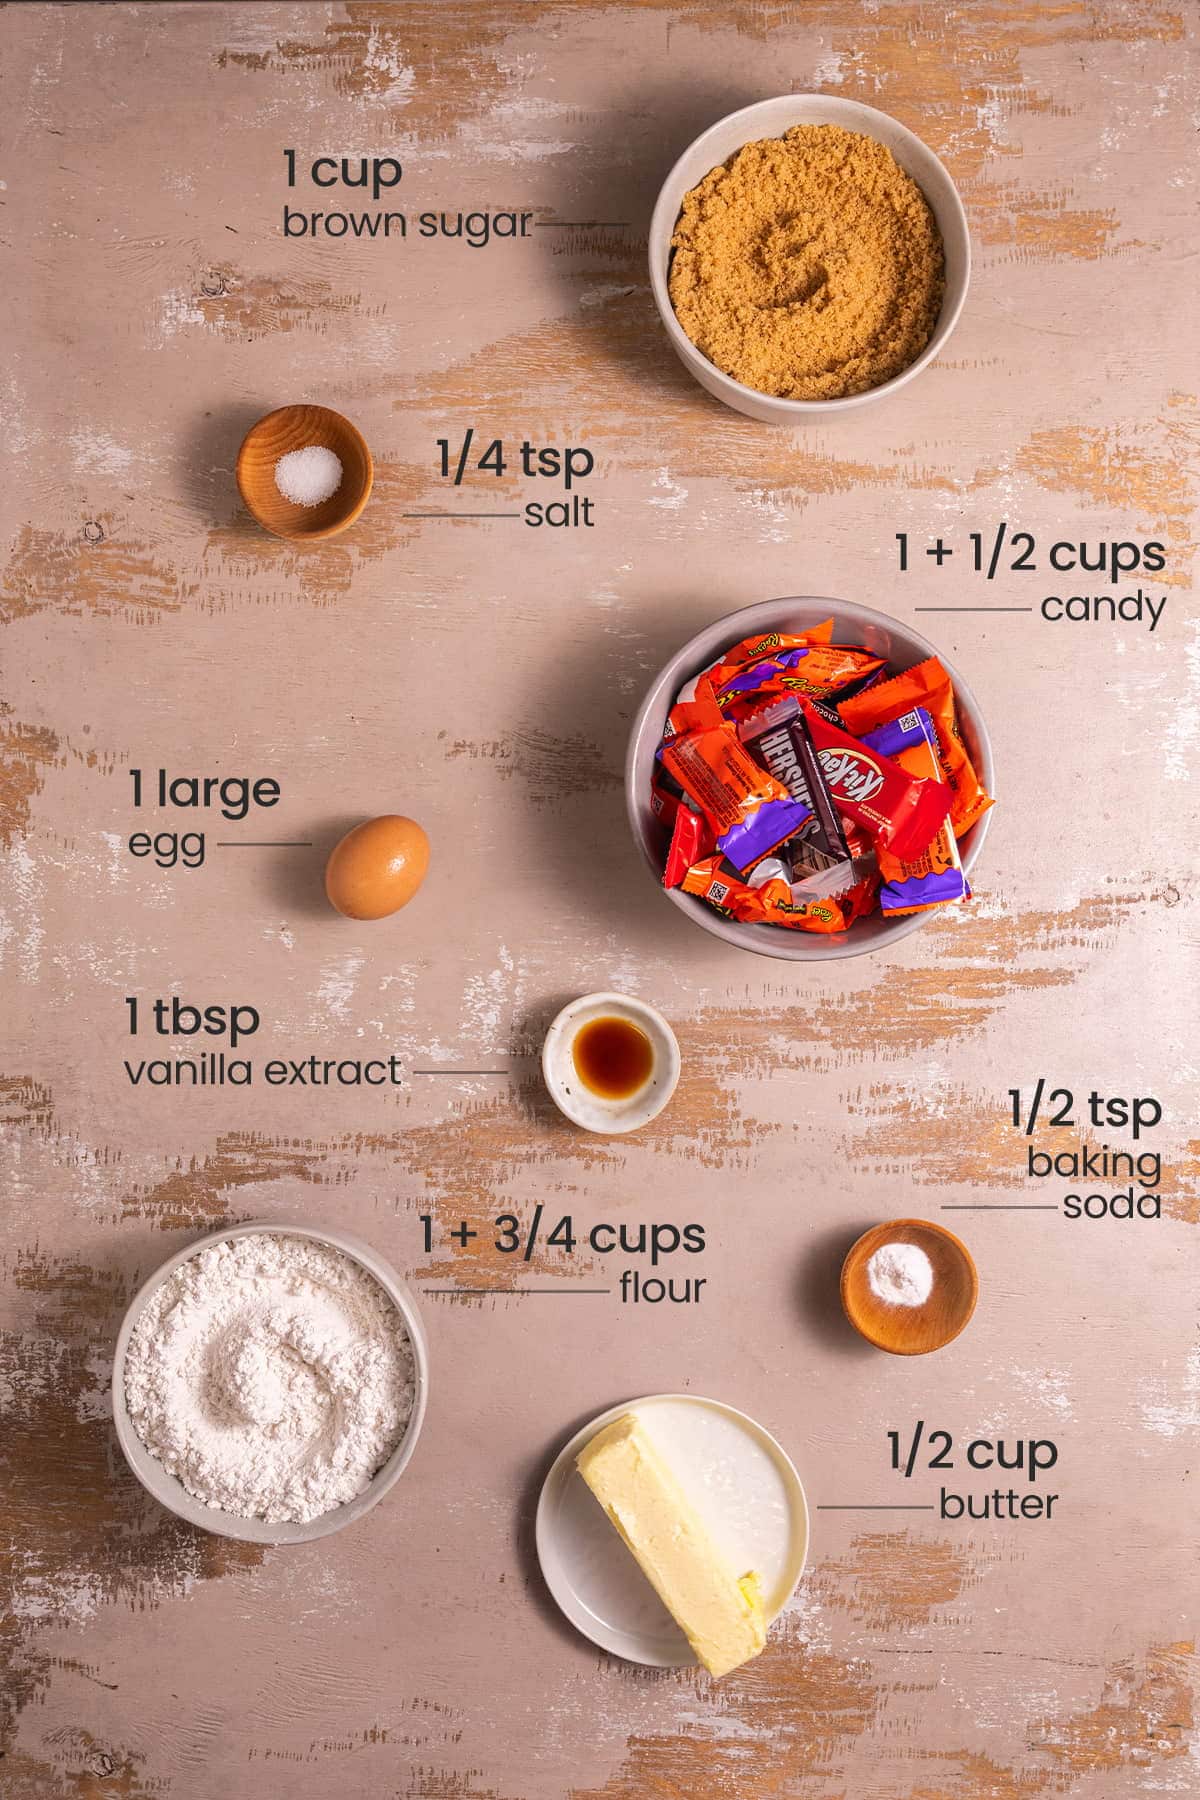 ingredients for leftover halloween candy cookies - brown sugar, salt, candy, egg, vanilla extract, baking soda, flour, butter